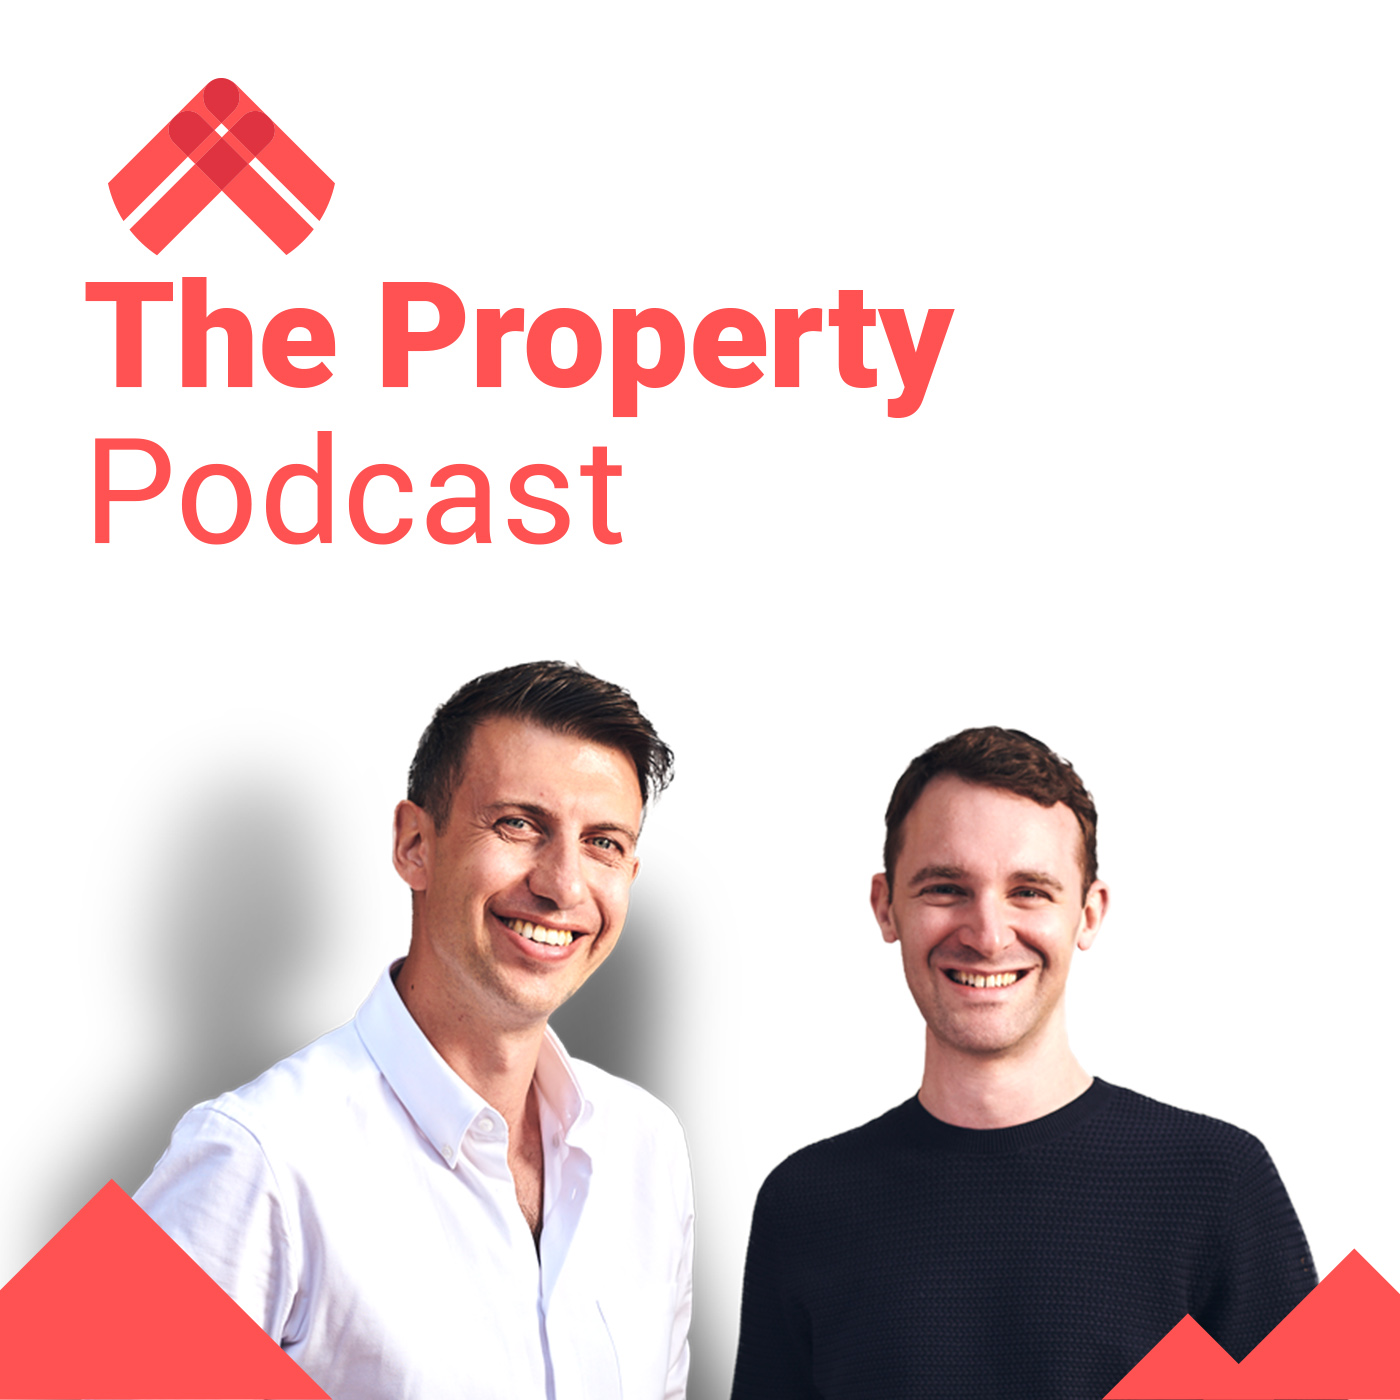 ASK217: Is it worth investing in major property companies?